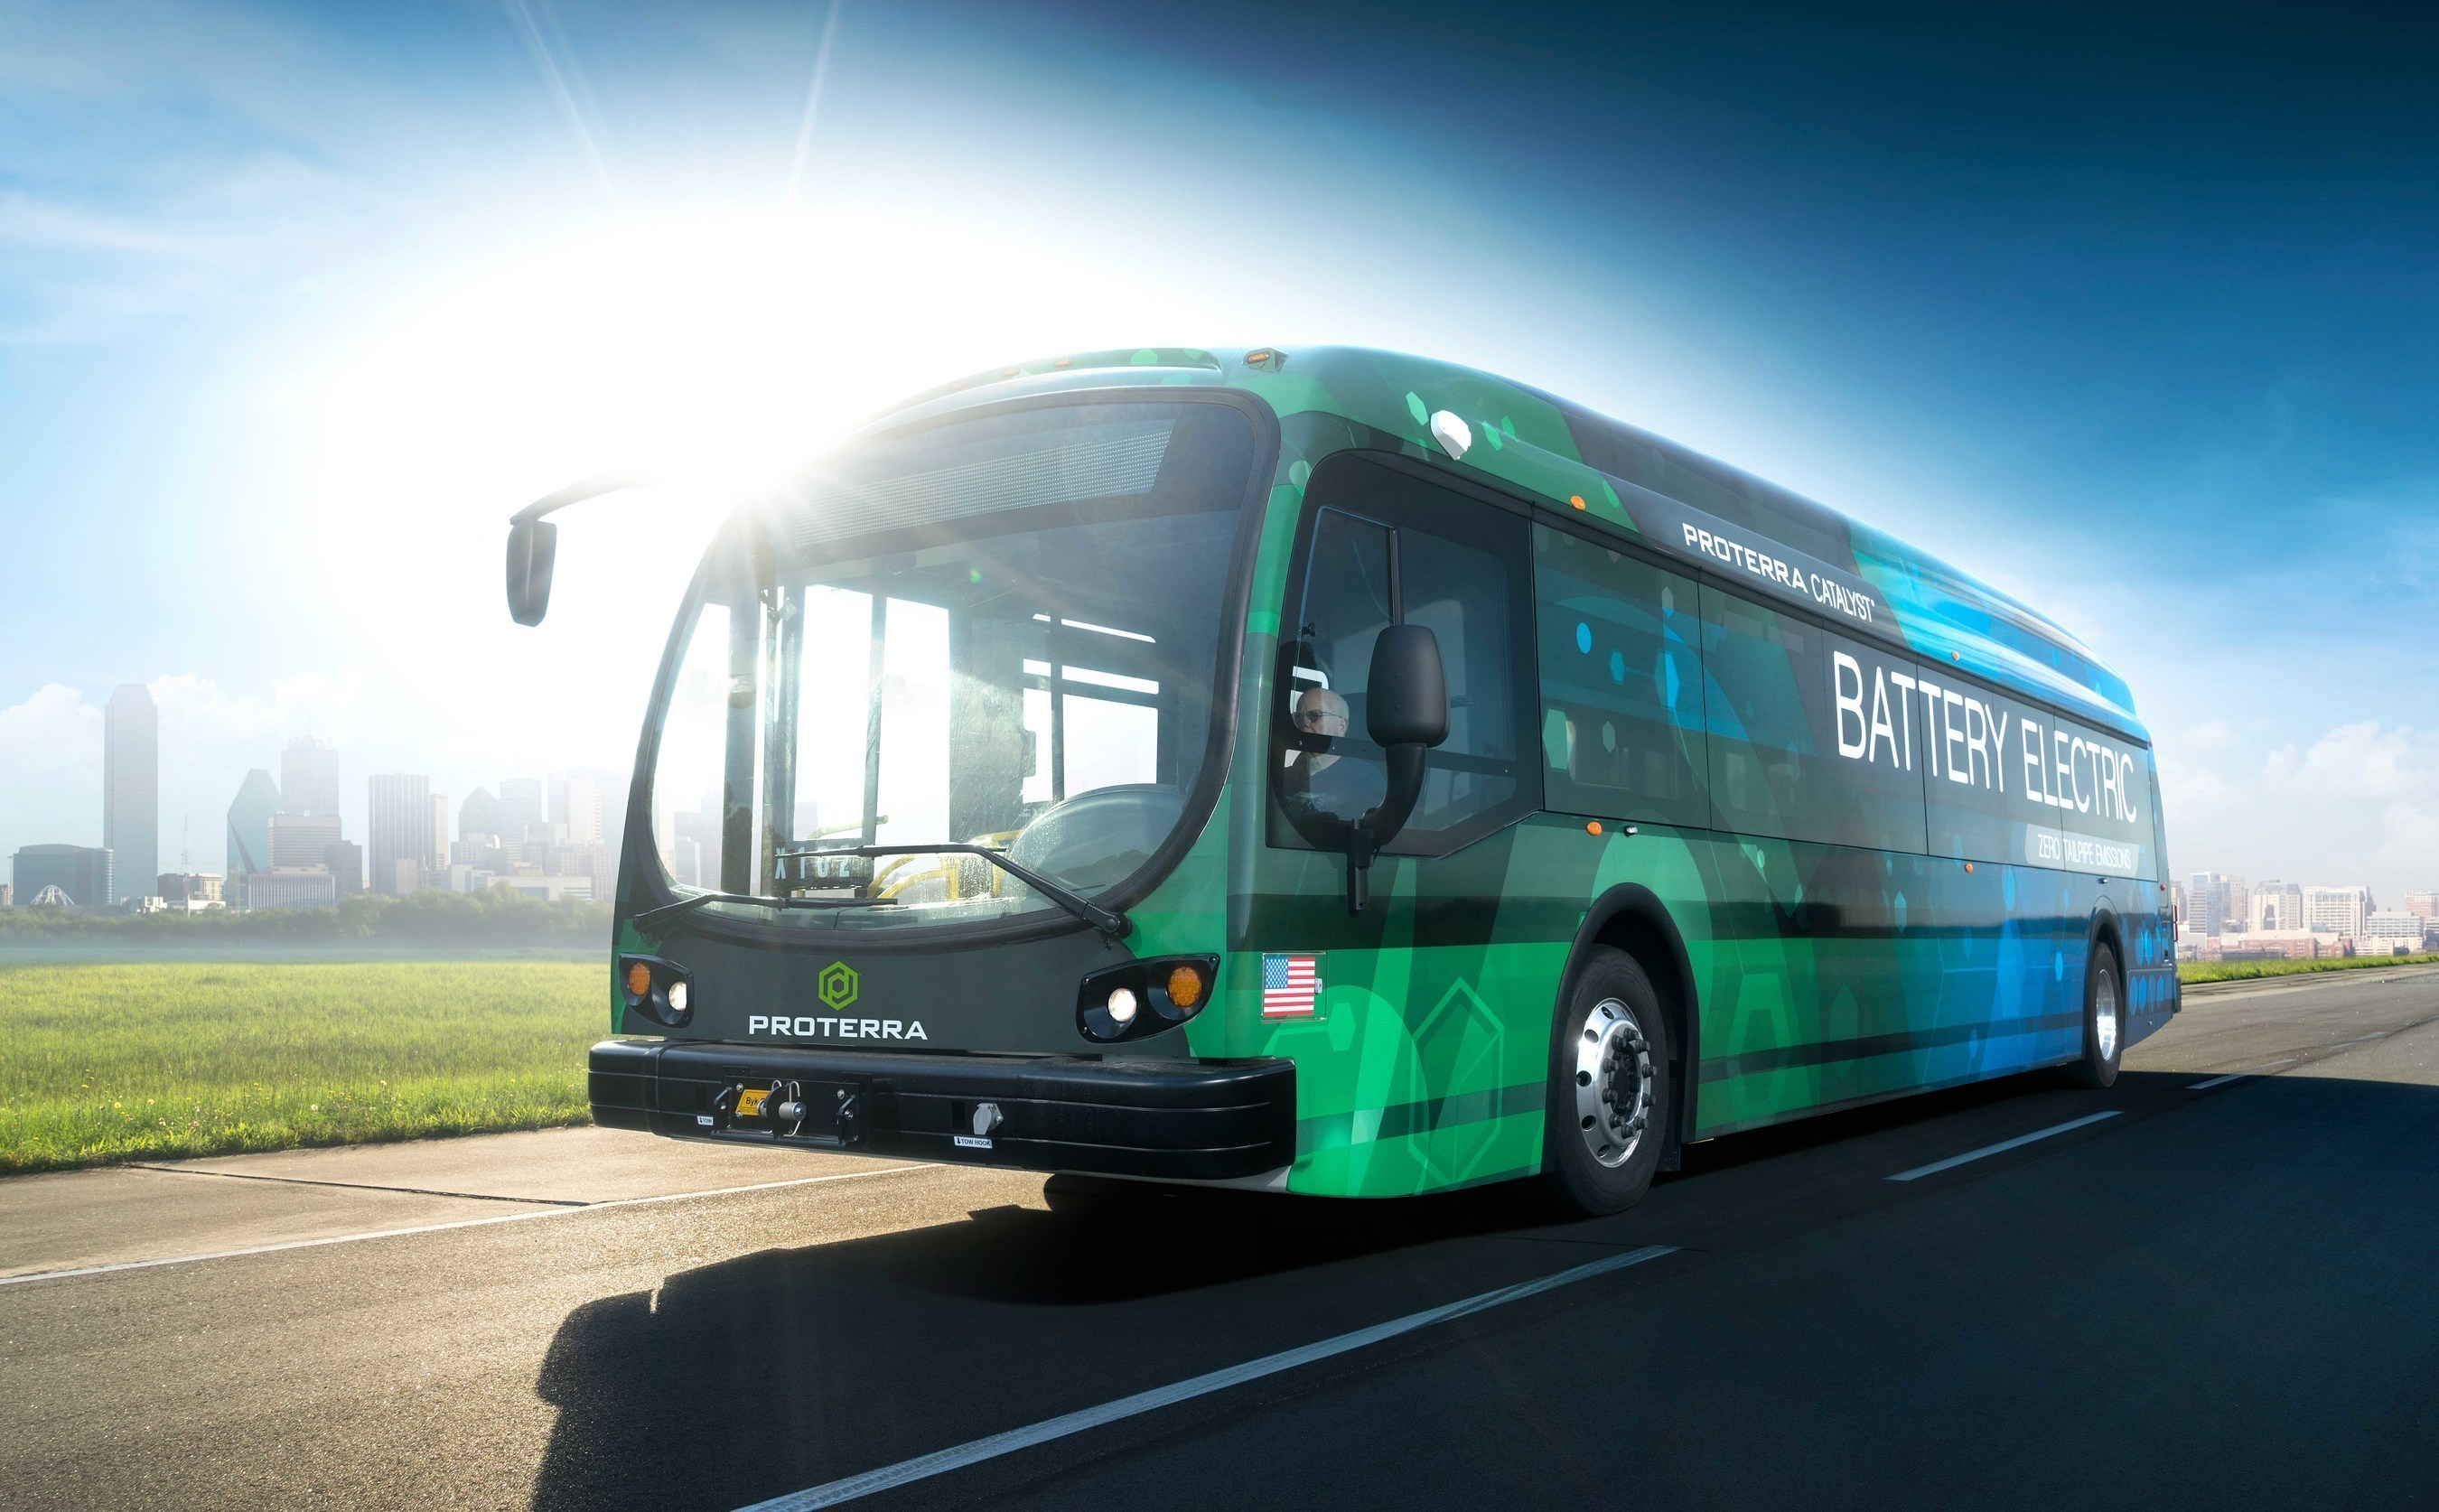 The Proterra Catalyst E2 is capable of serving the full daily mileage needs of nearly every U.S. mass transit route on a single charge and offers the transit industry the first direct replacement for fossil-fueled transit vehicles.